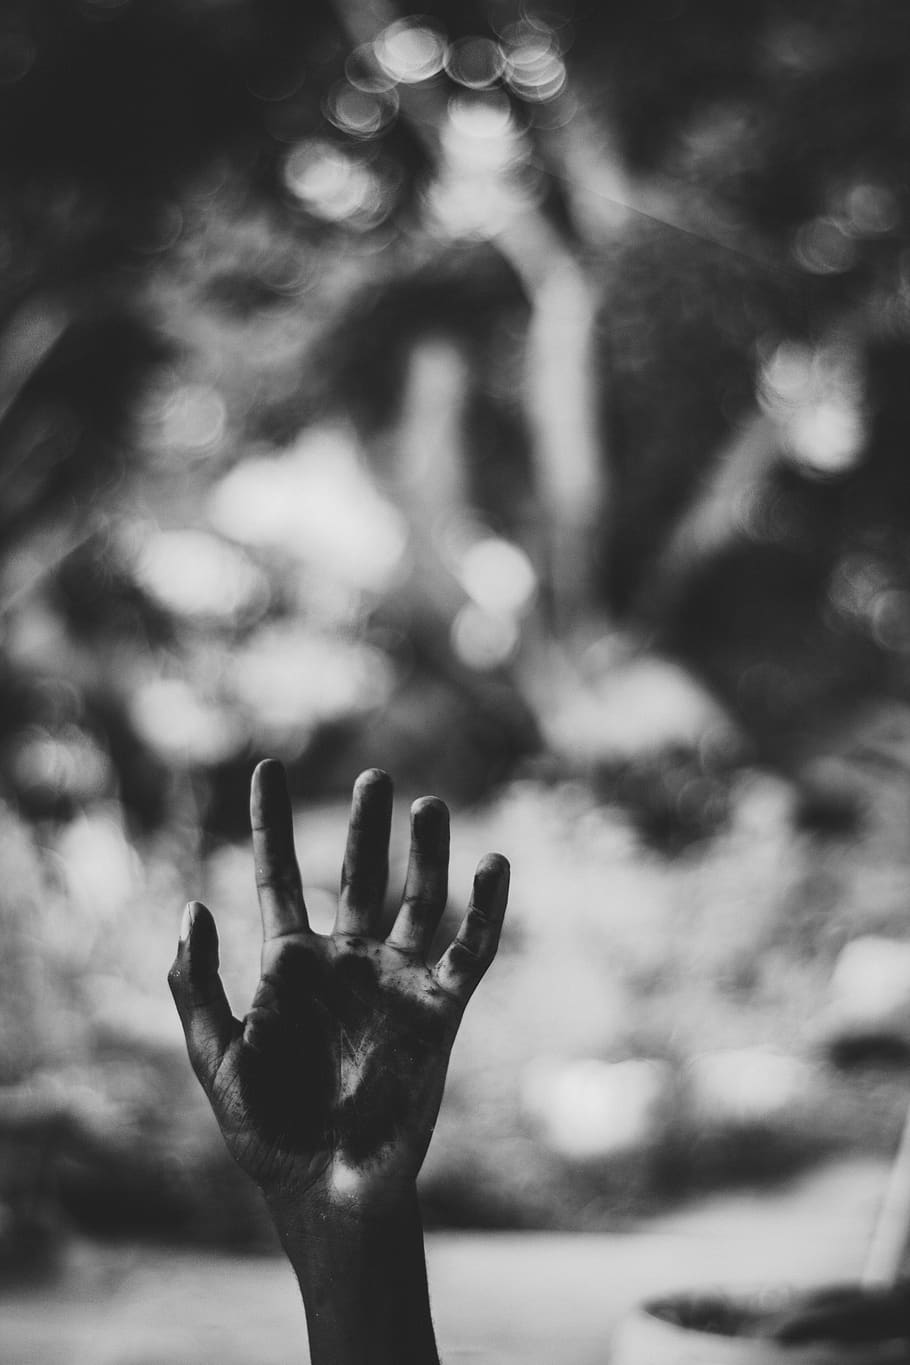 HD wallpaper: Grayscale Photo of Left Human Palm, black and white, blurred  background | Wallpaper Flare